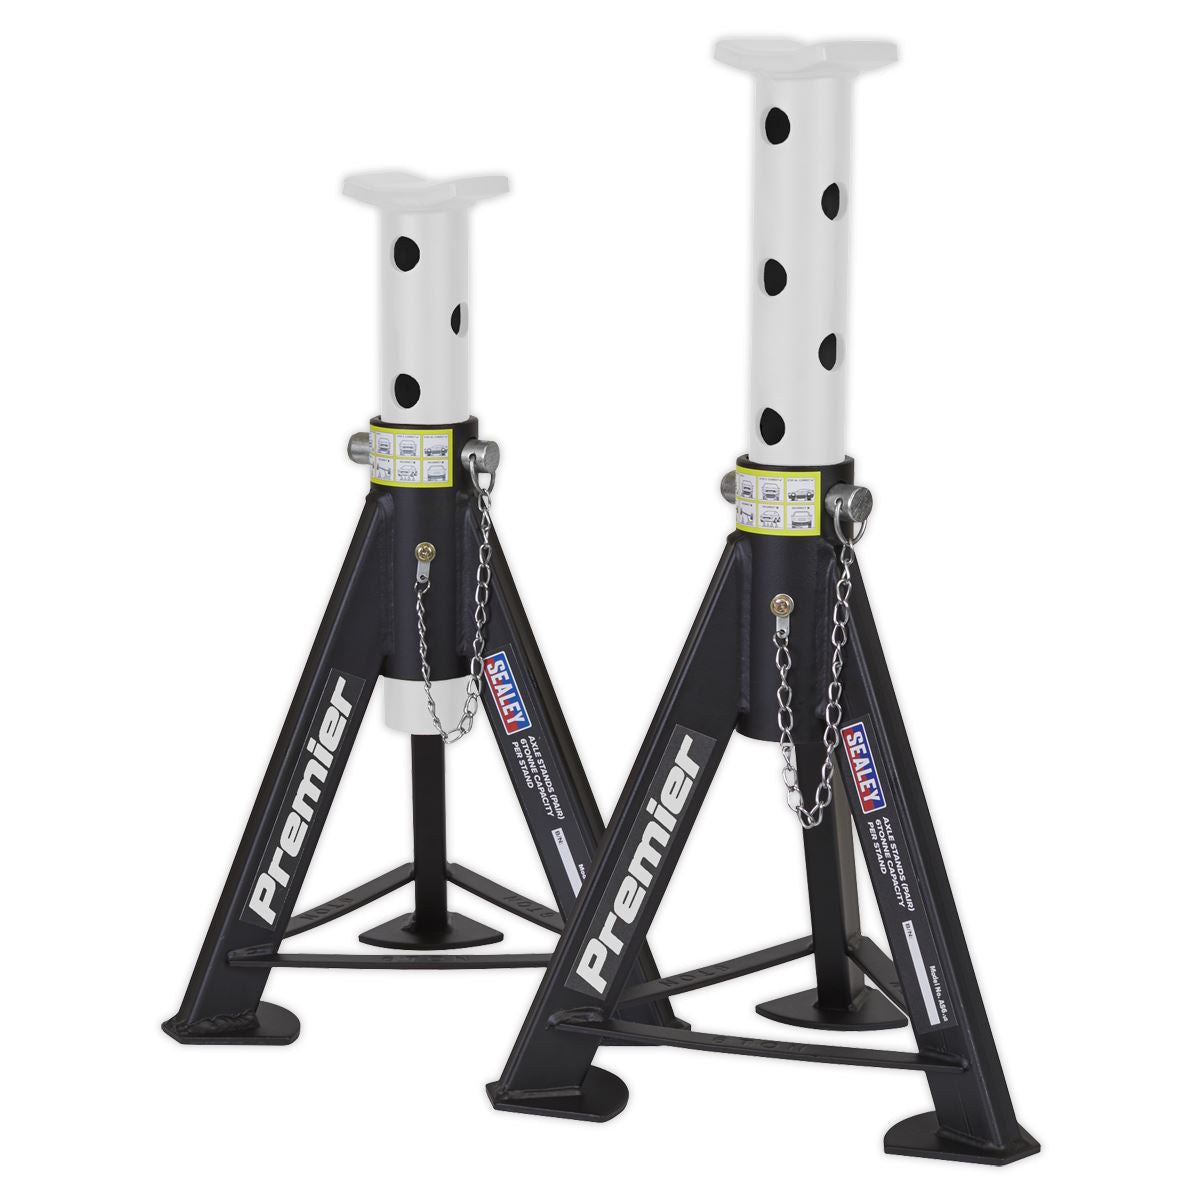 Sealey Premier Axle Stands (Pair) 6 Tonne Capacity per Stand - White